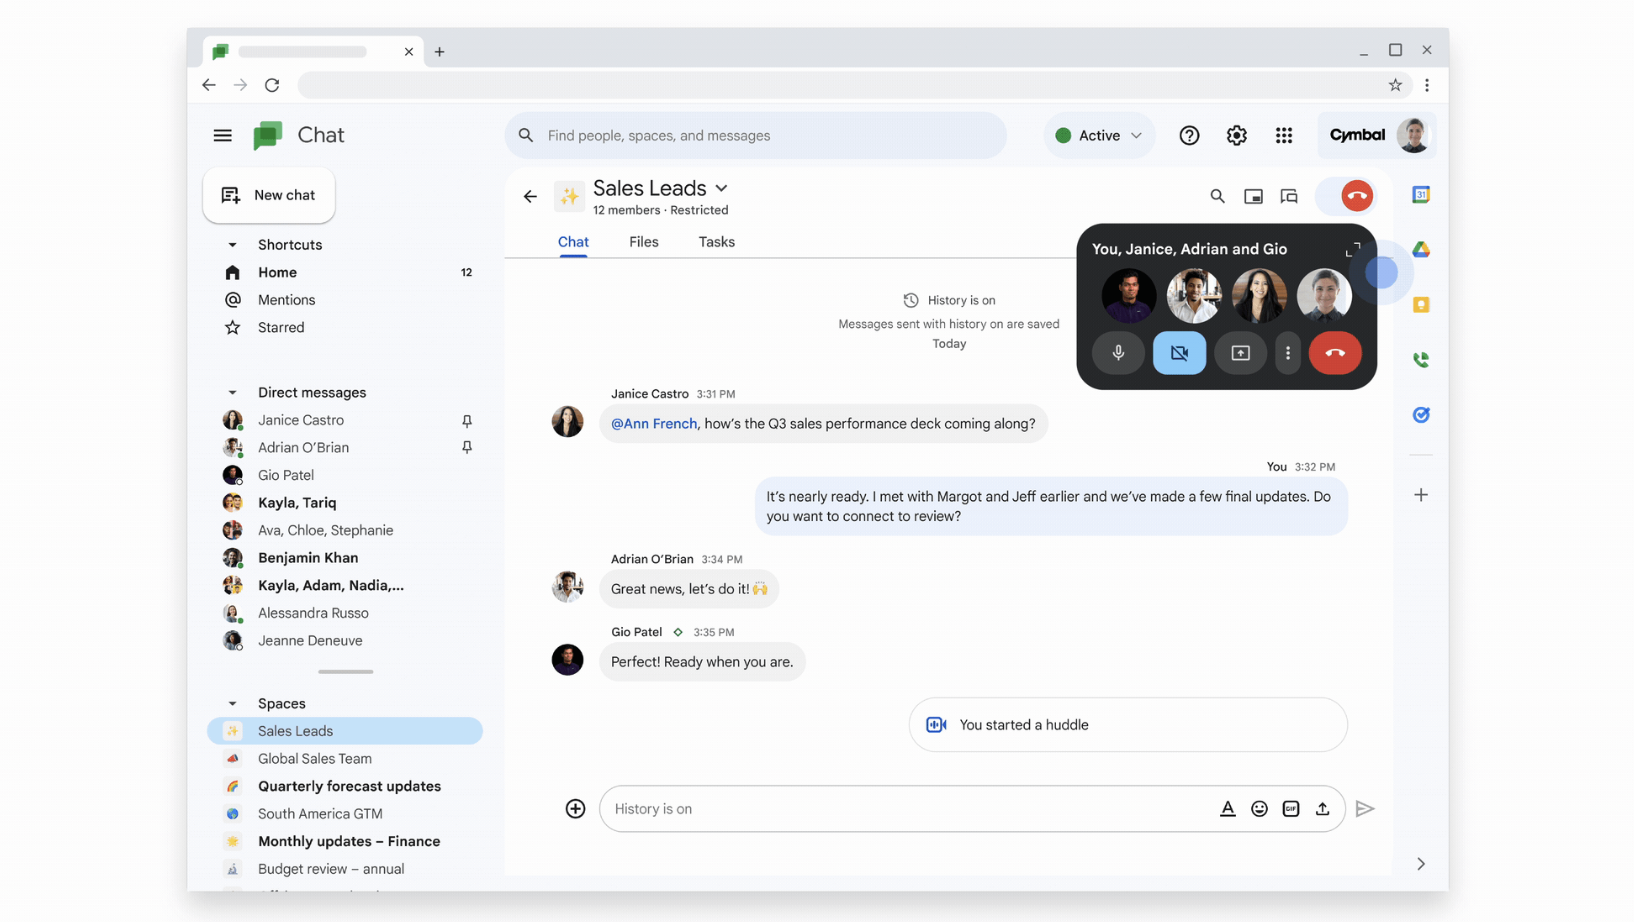 Google Workspace Users Can Request No-Cost Trial Of Duet AI